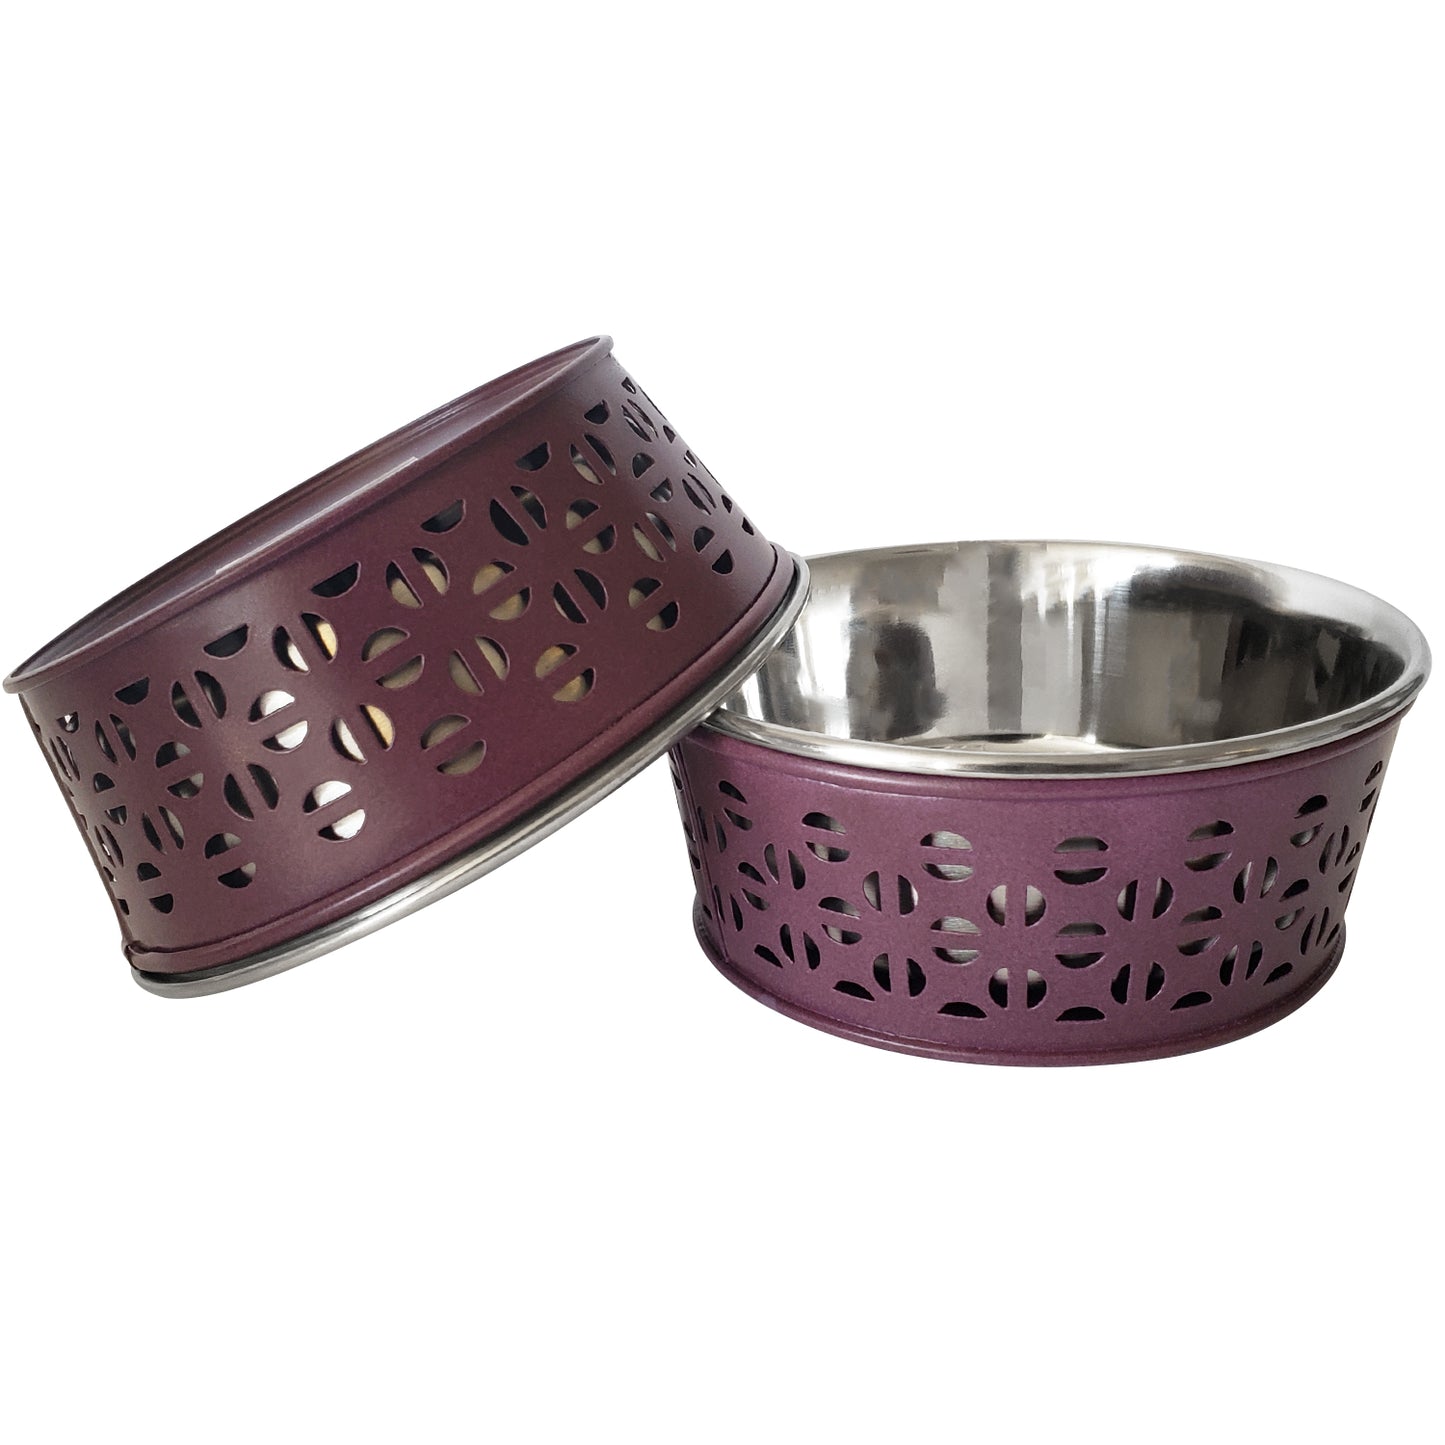 Country Living Set of 2 Stainless Steel Farmhouse Style Dog Bowls